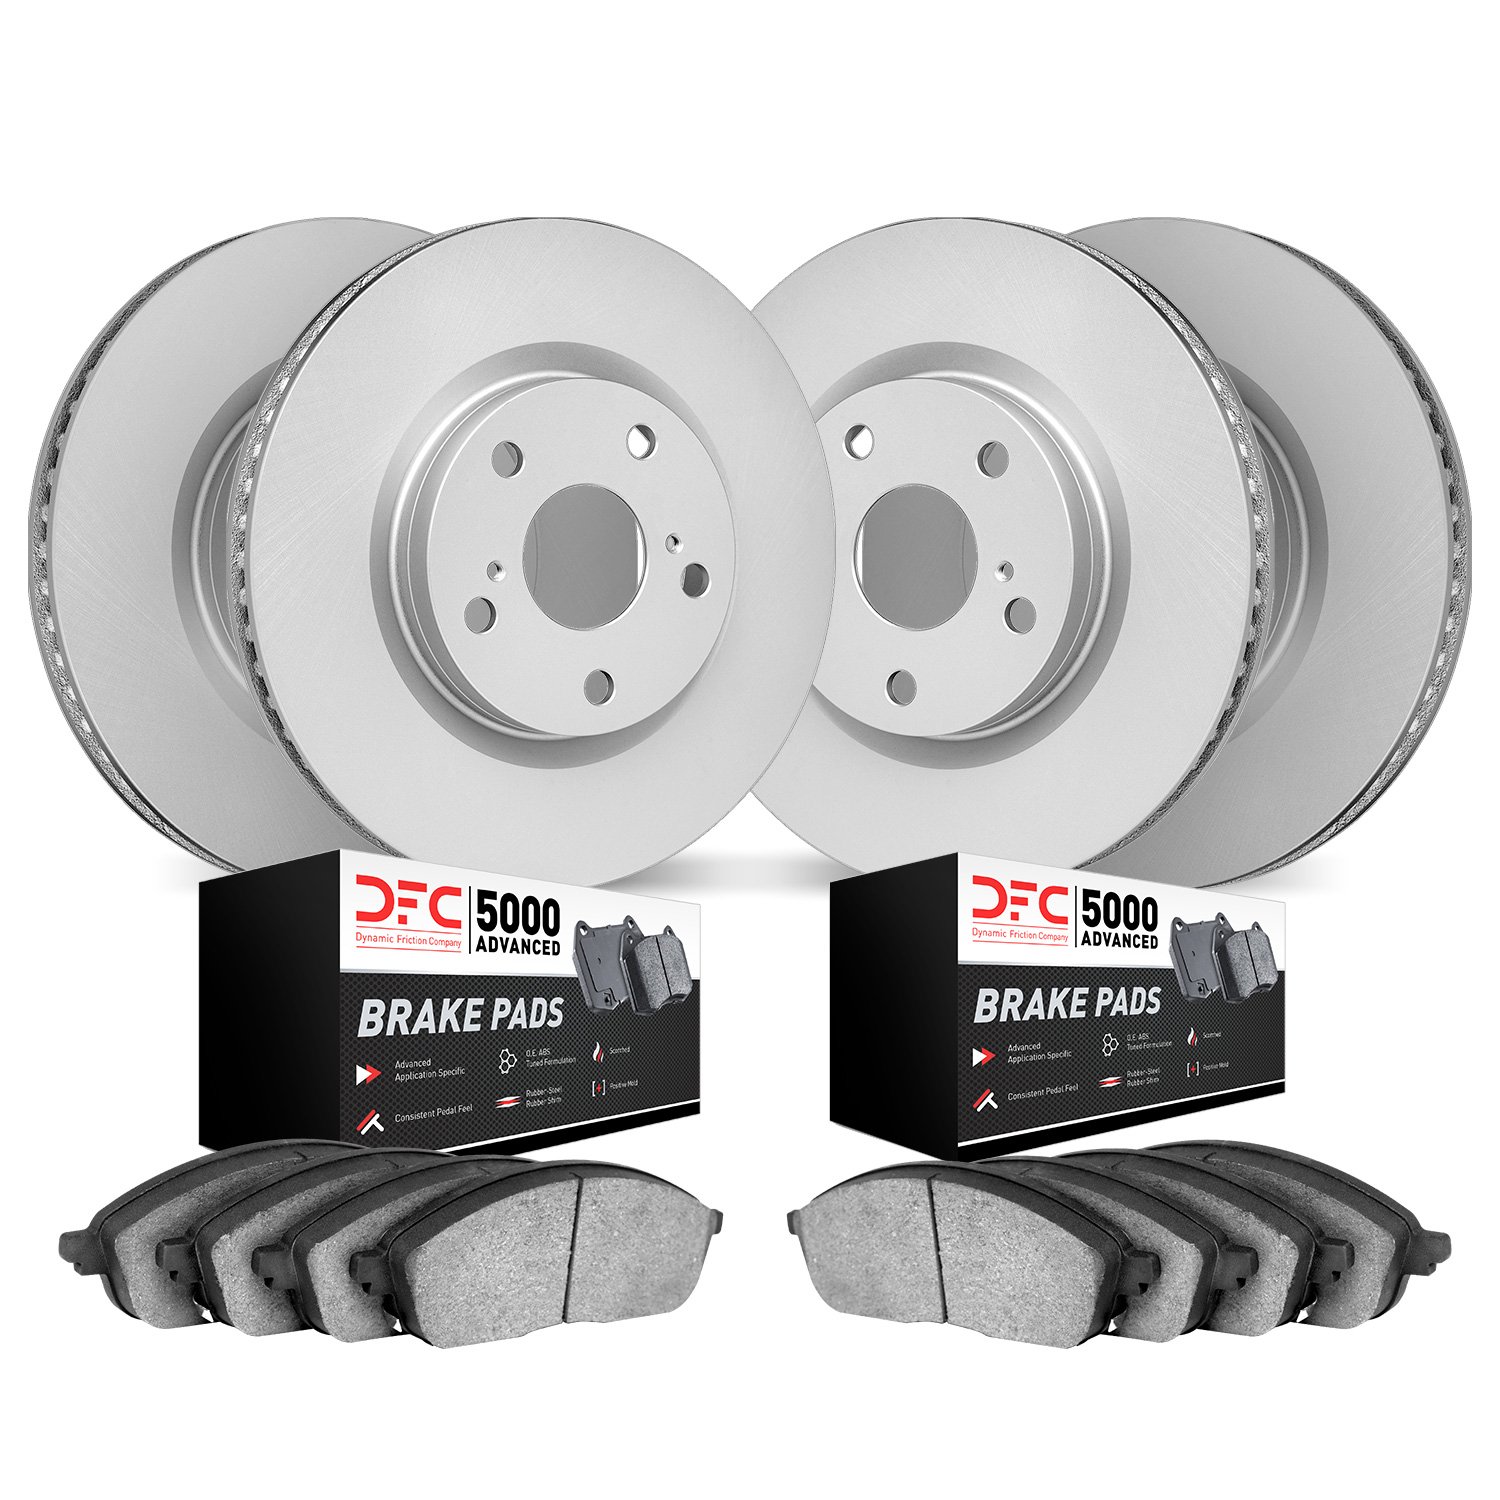 4504-54128 Geospec Brake Rotors w/5000 Advanced Brake Pads Kit, 2010-2011 Ford/Lincoln/Mercury/Mazda, Position: Front and Rear